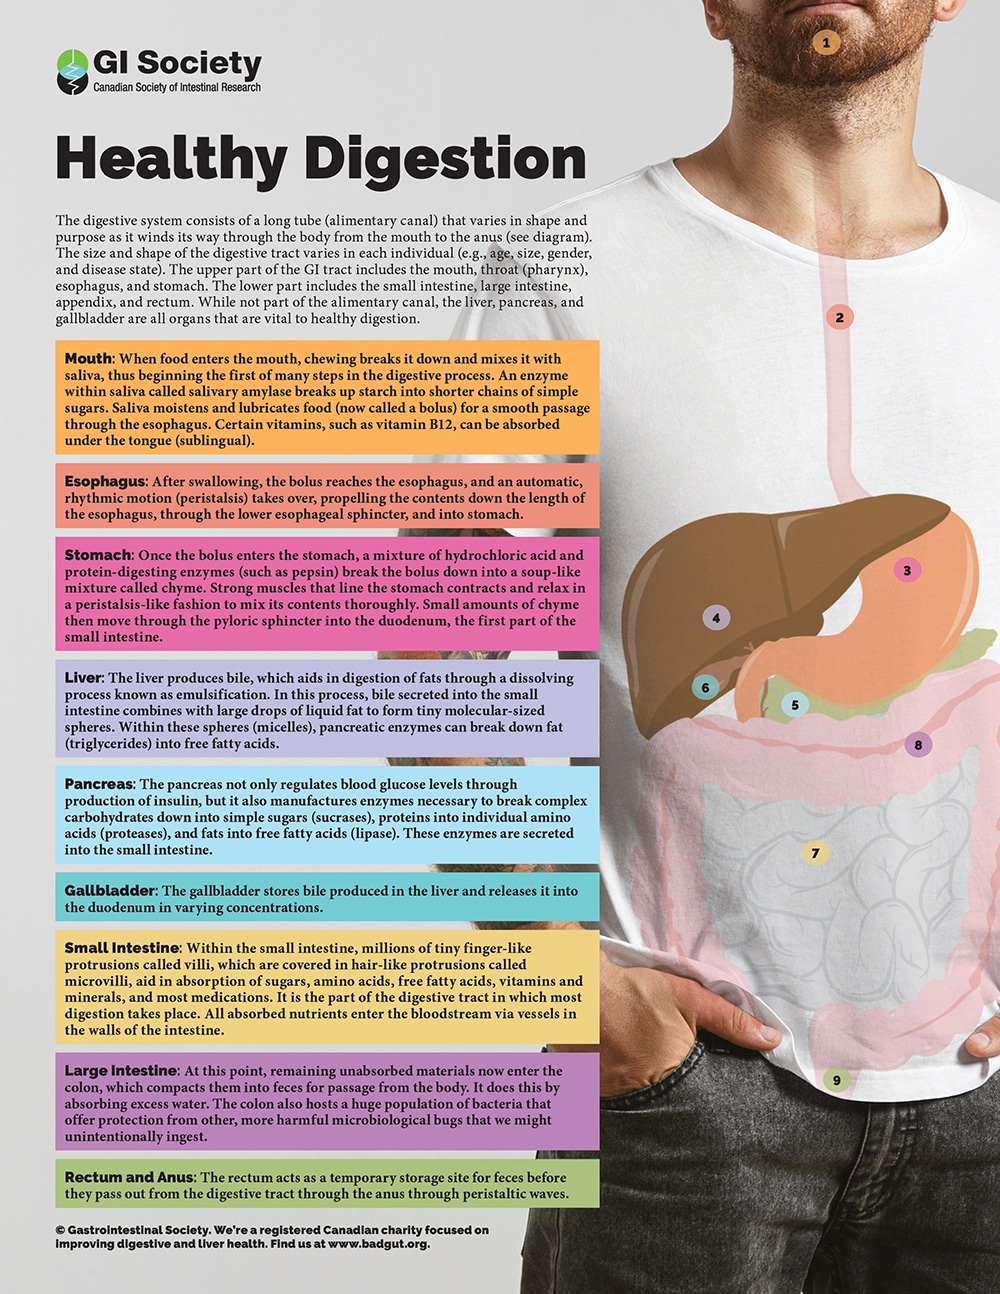 Digestive health articles